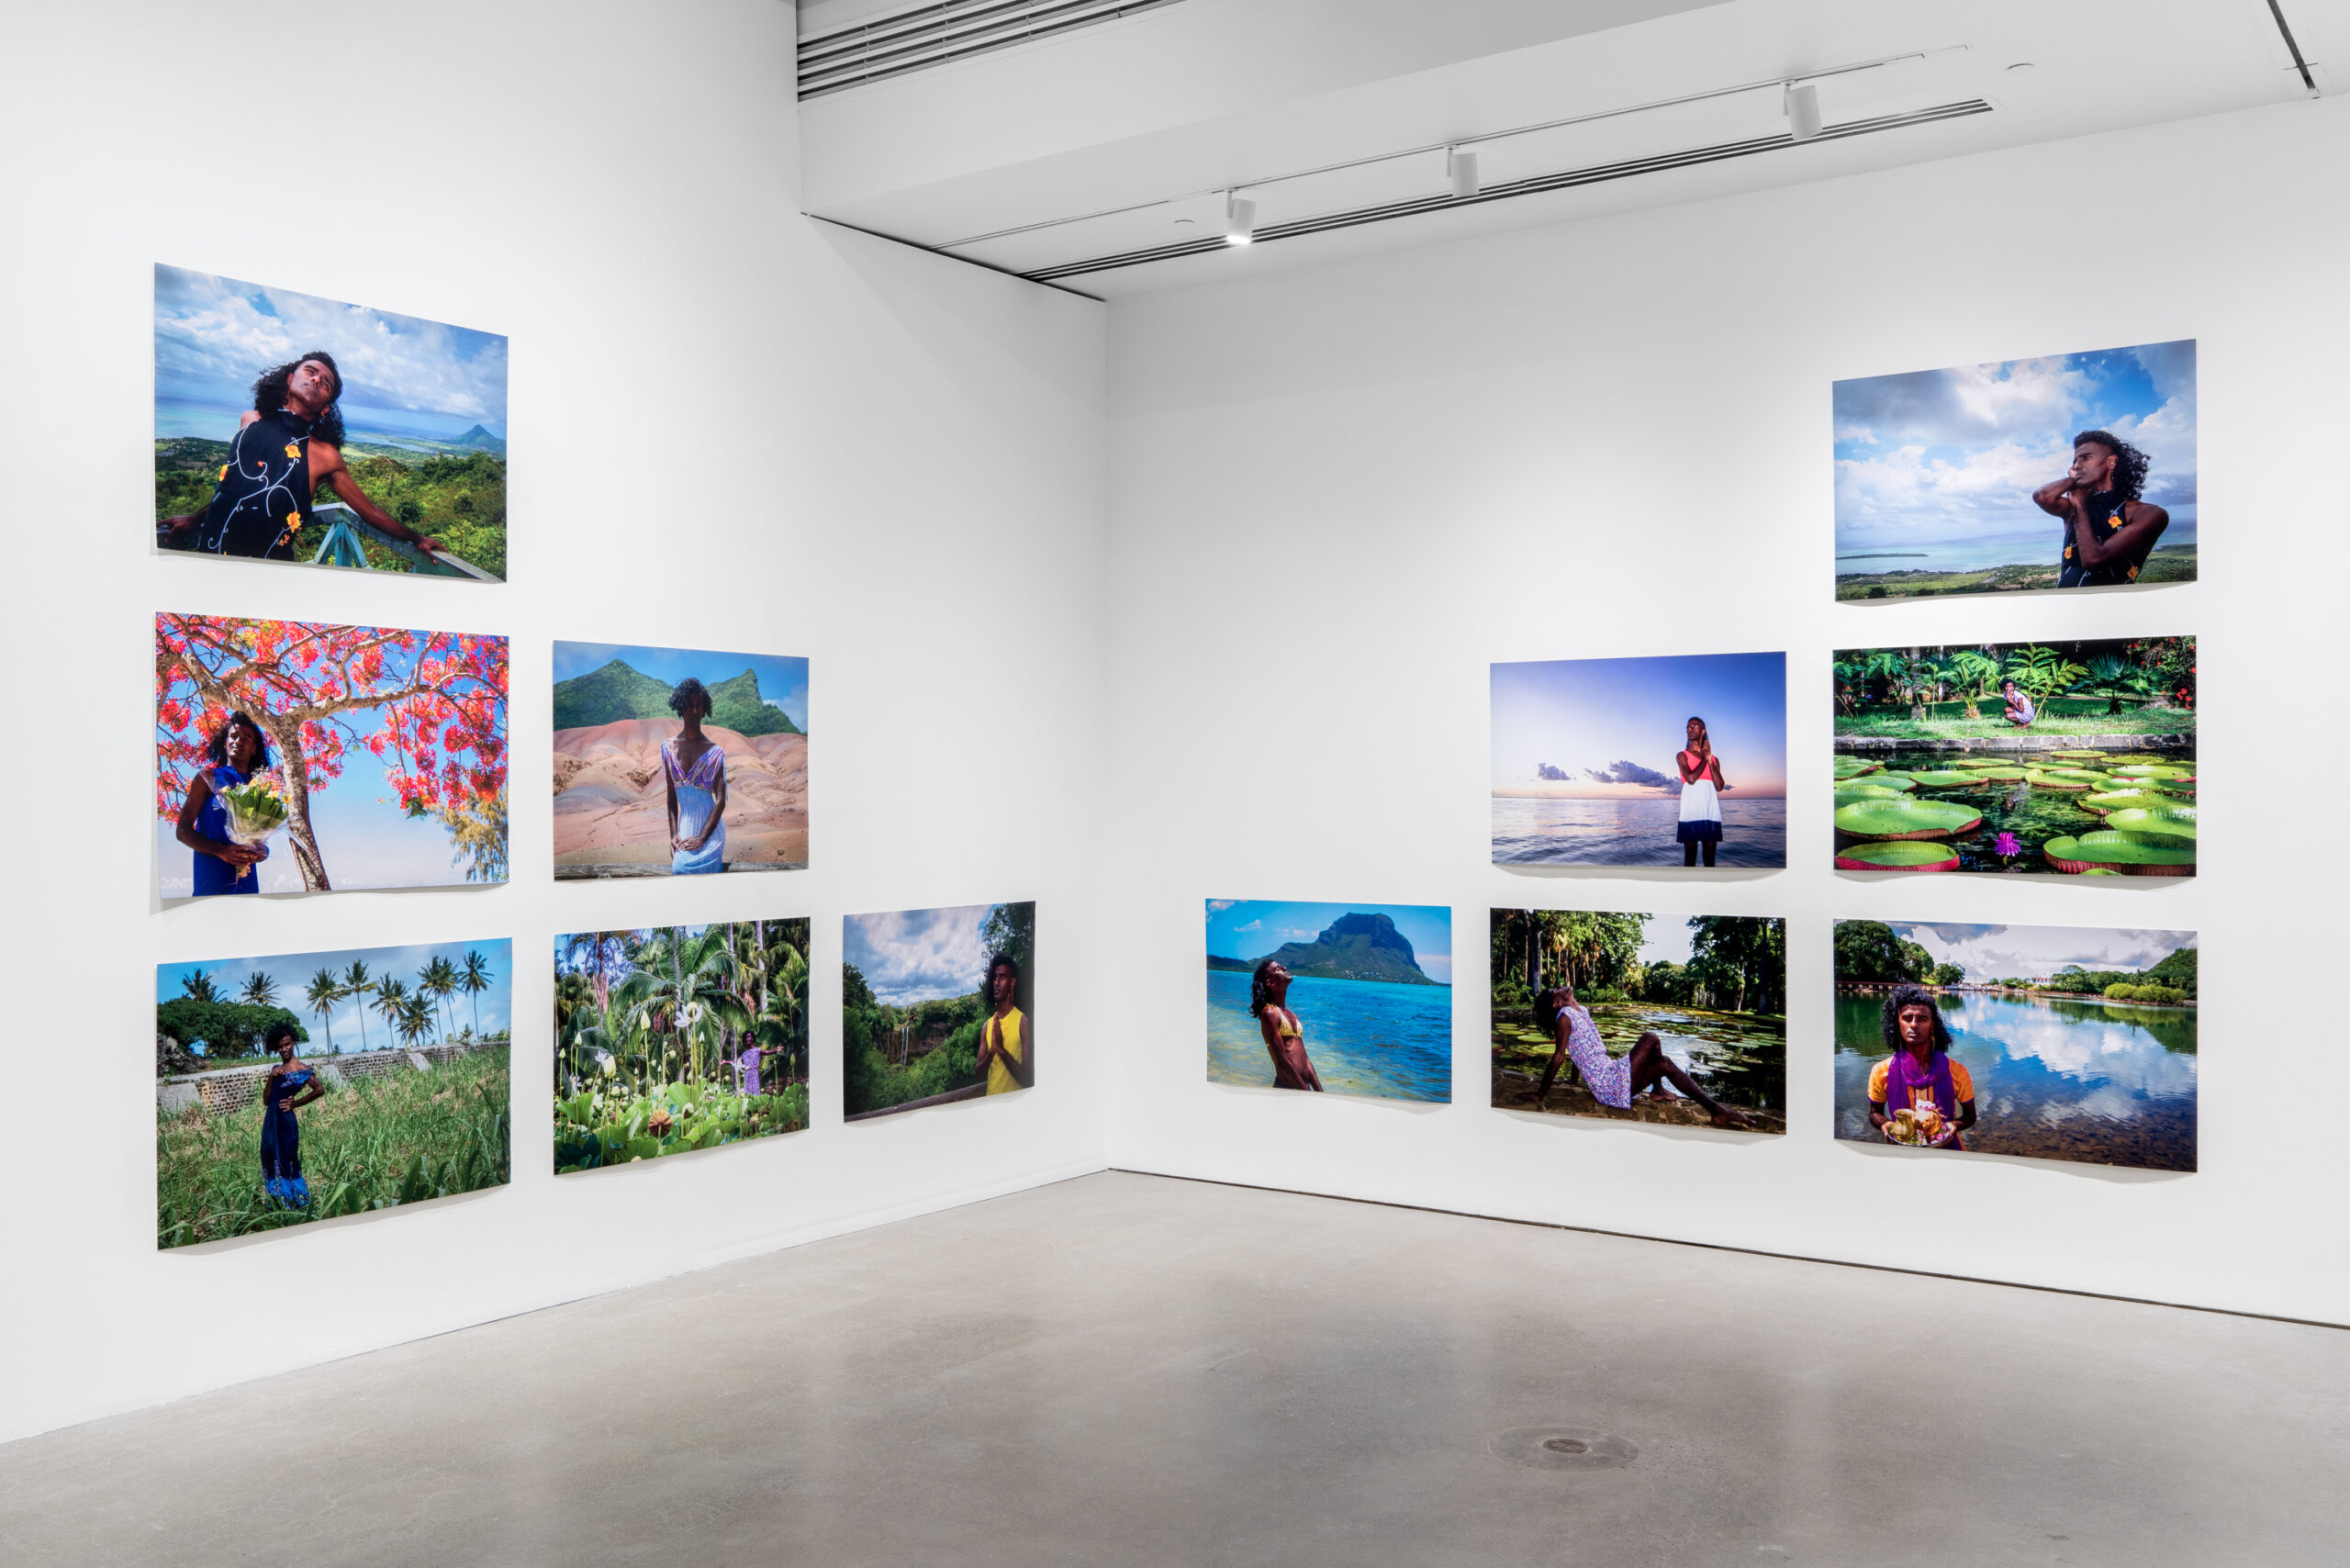 Kama La Mackerel, Breaking the Promise of Tropical Emptiness: Trans Subjectivity in the Postcard, 2019, installation view at the Galerie de l’UQAM as part of MOMENTA 2021. Photo: Jean-Michael Seminaro